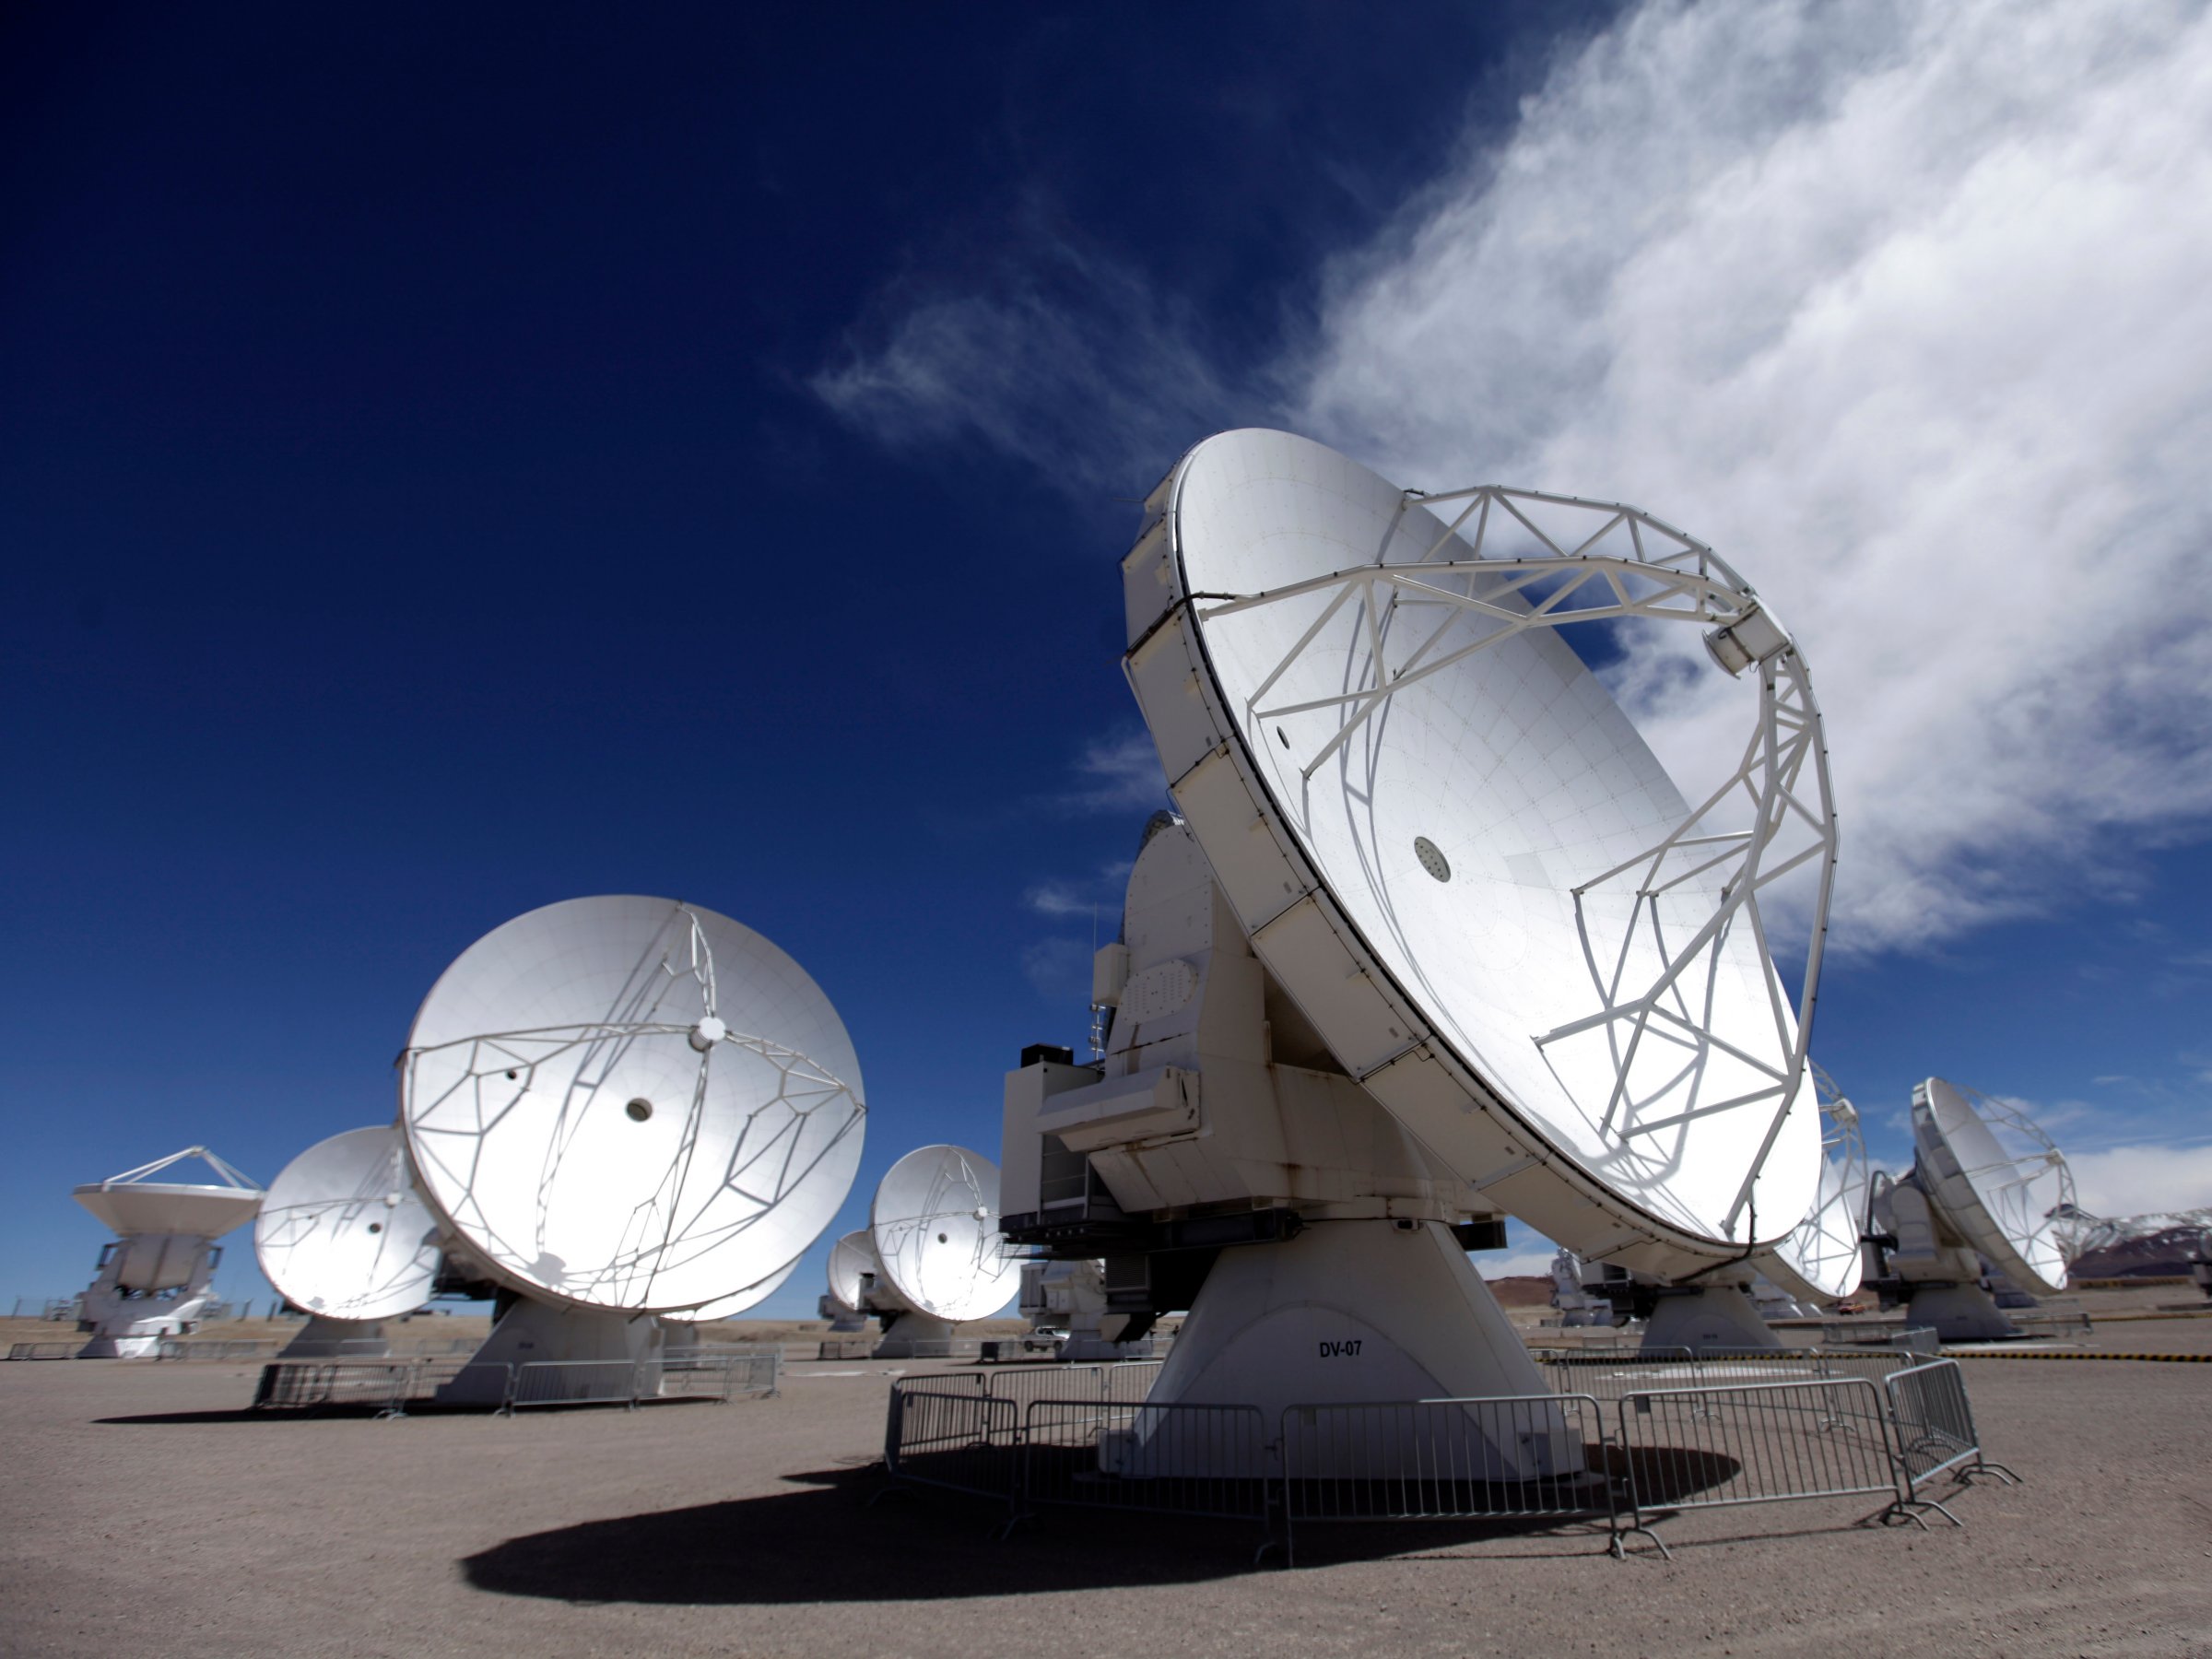 In this Sept. 27, 2012 photo, radio antennas face the sky as part of one of the worlds largest astronomy projects, the Atacama Large Millimeter/submillimeter Array (ALMA) in Chajnator in the Atacama desert in northern Chile.